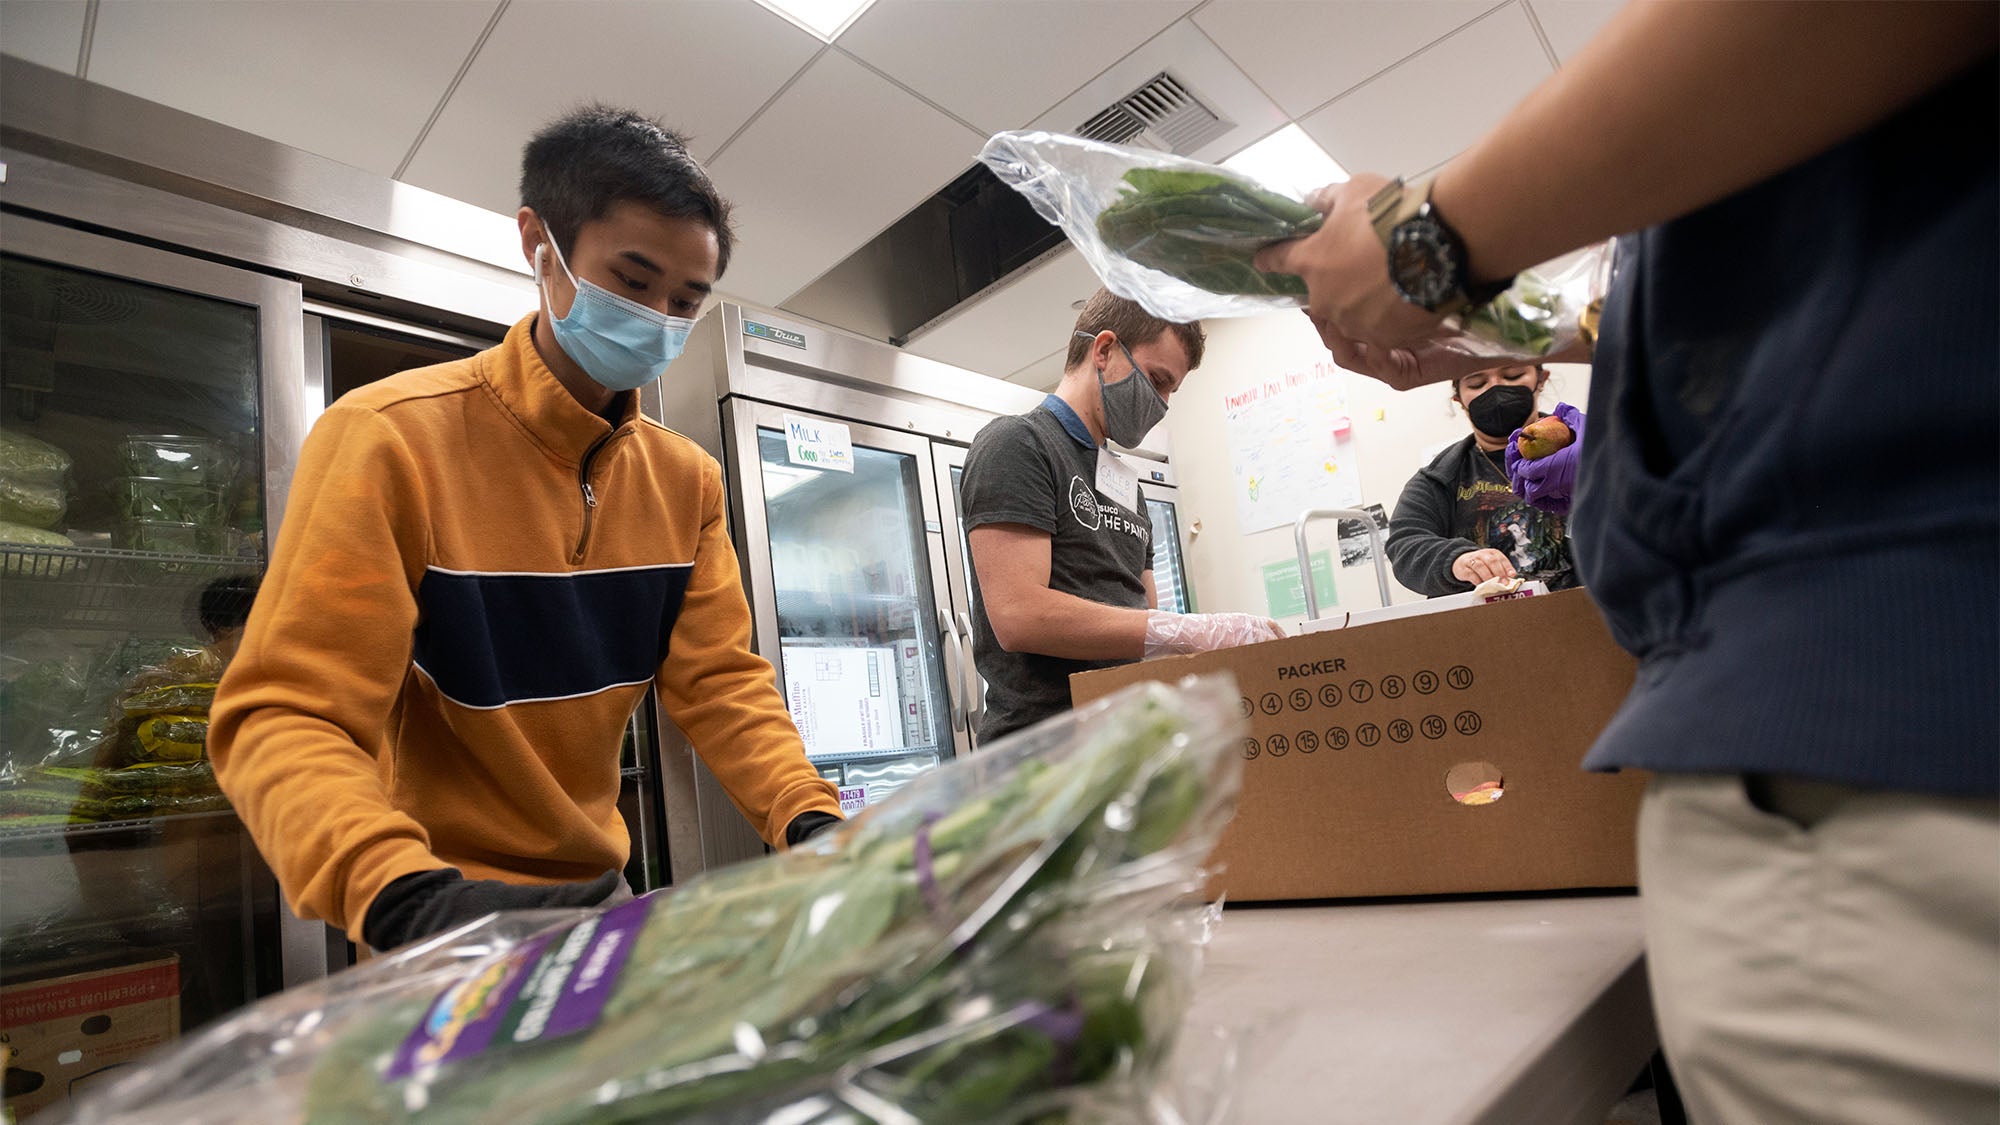 Students prepare vegetables for distribution at The Pantry.